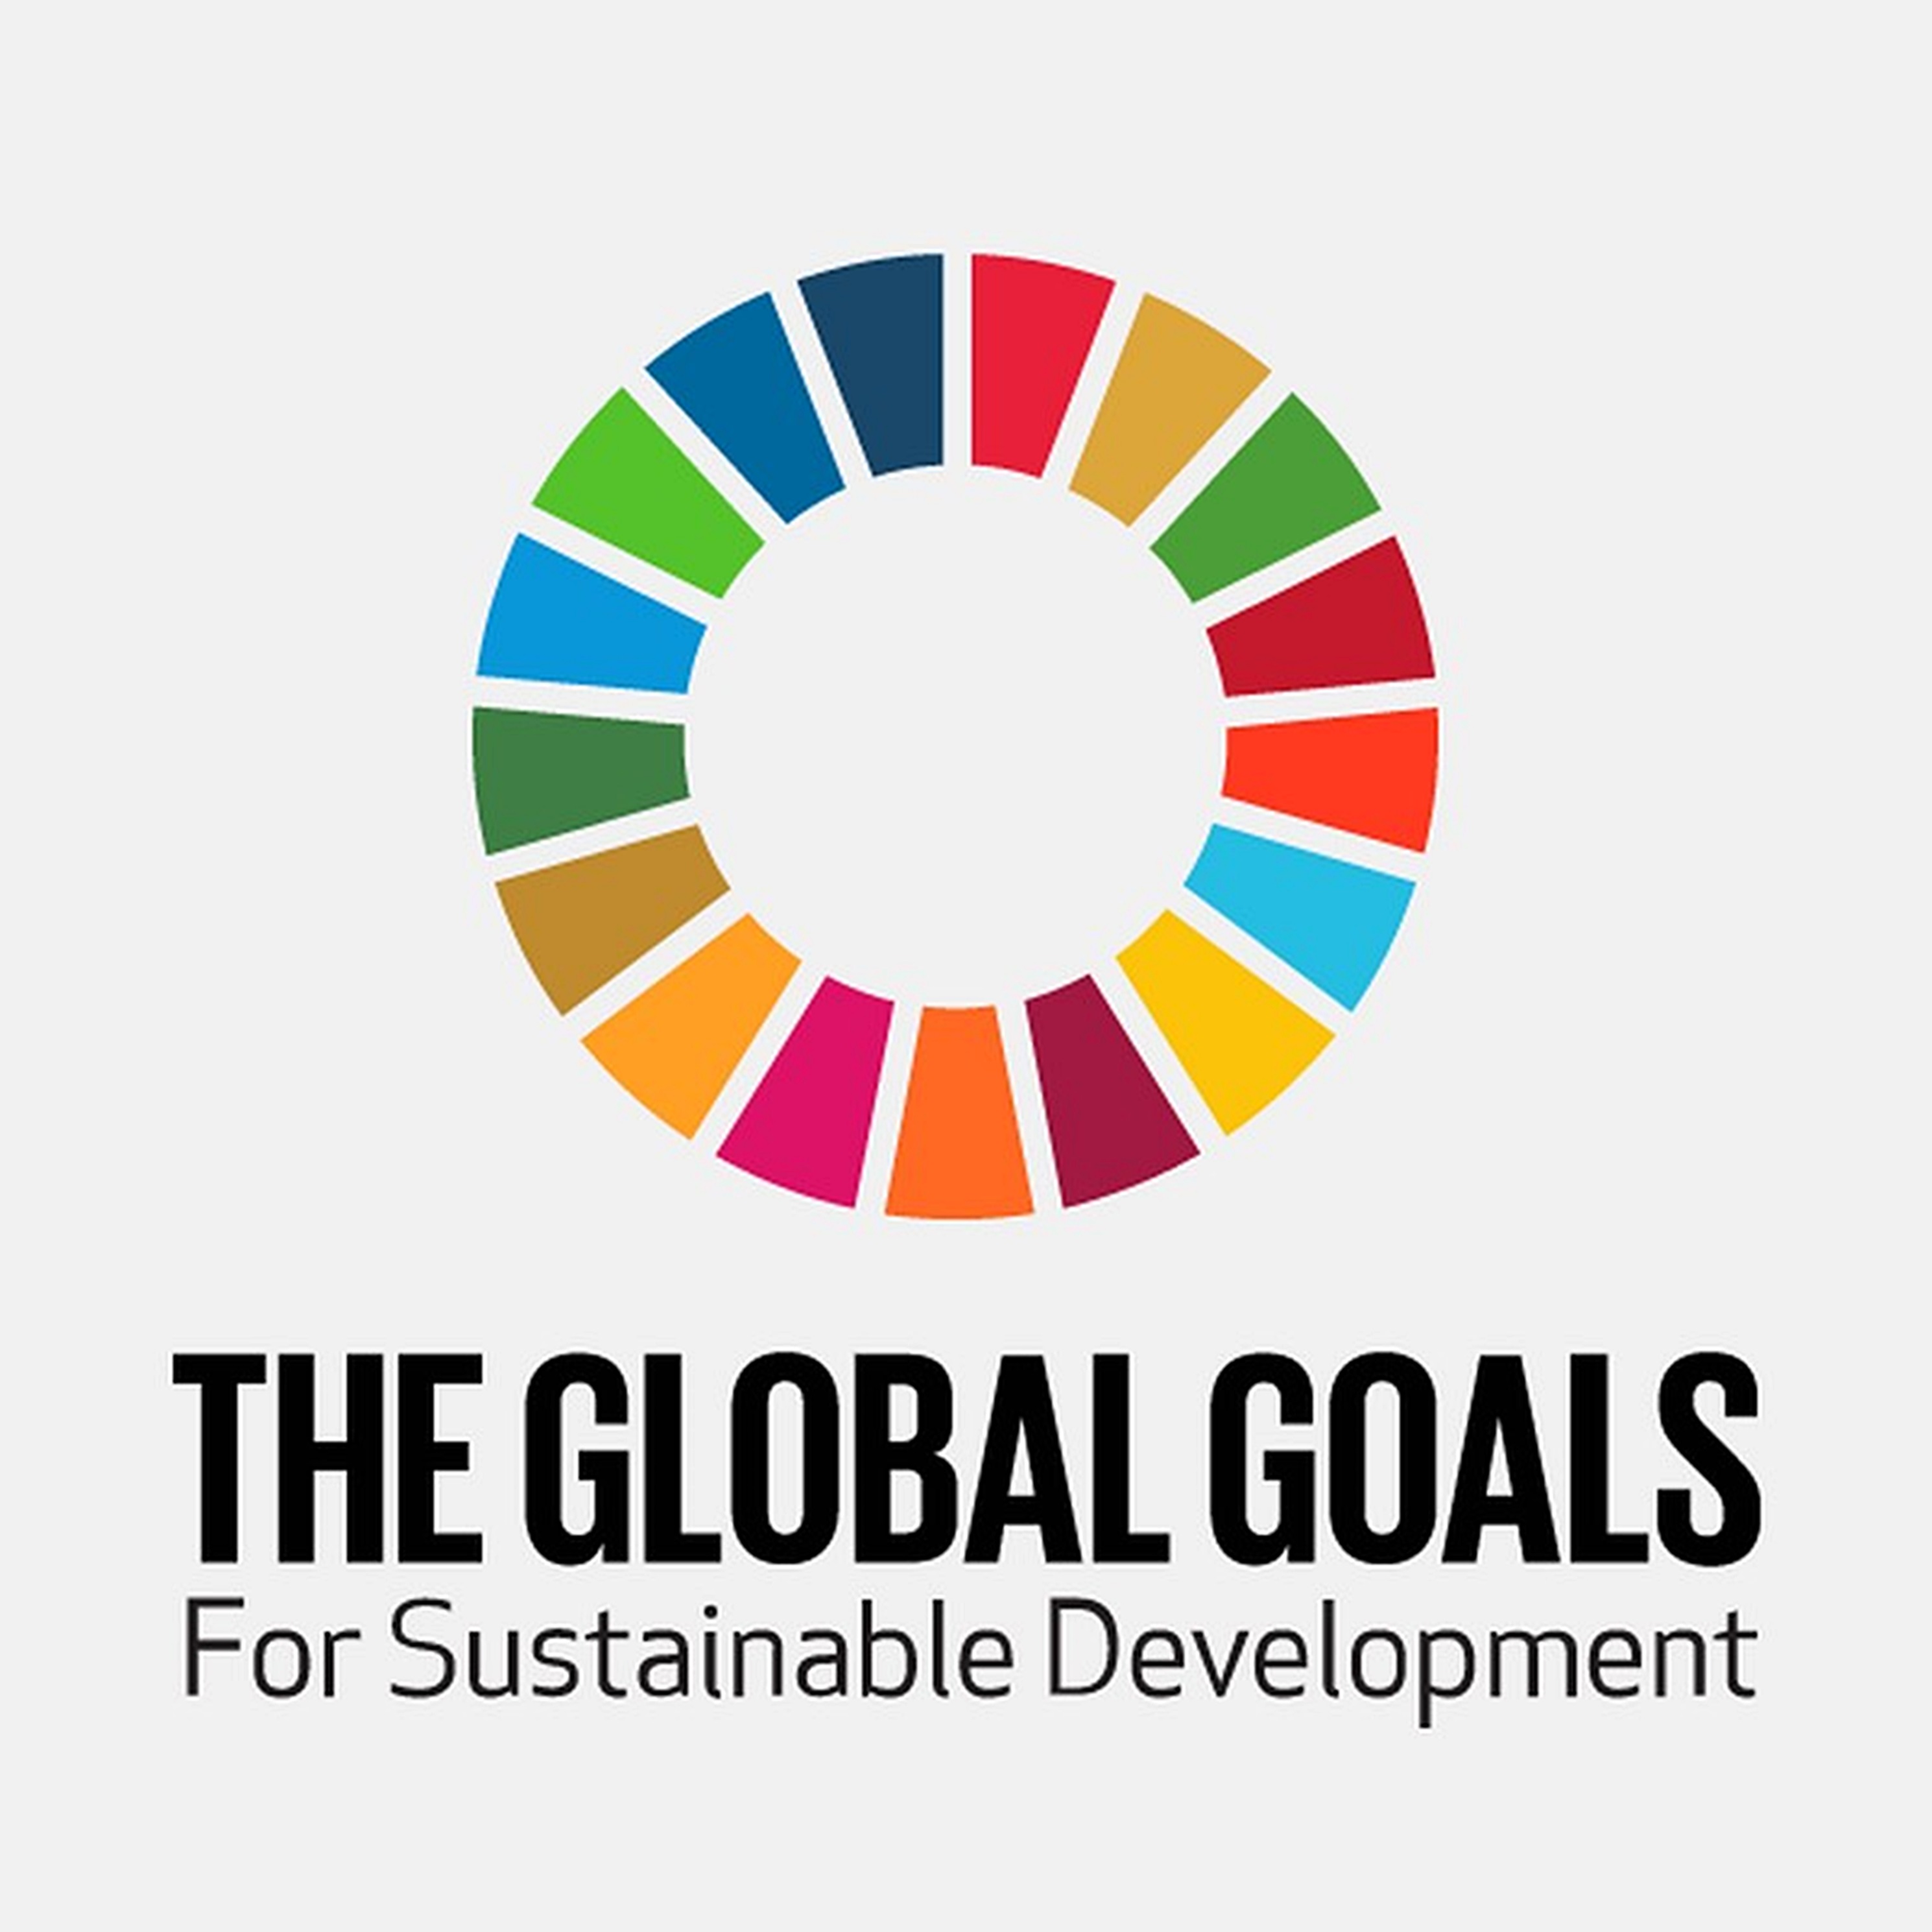 Implementation of SDGs and New Urban Agenda discussed during SDG Week